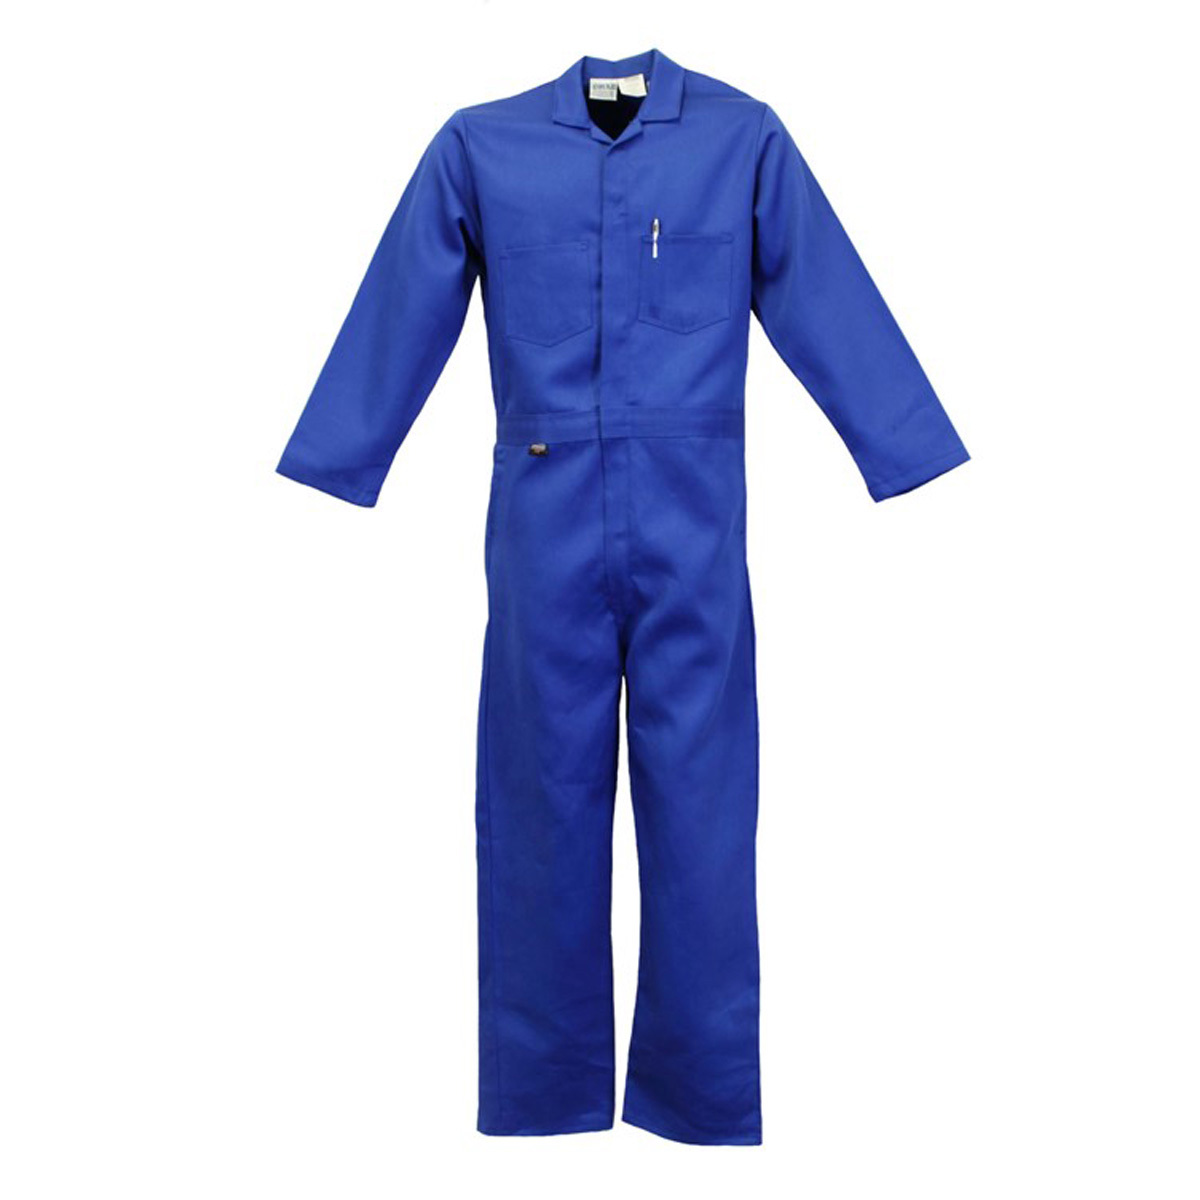 Stanco Safety Products™ Size 5X Royal Blue Indura® Arc Rated Flame Resistant Coveralls With Front Zipper Closure